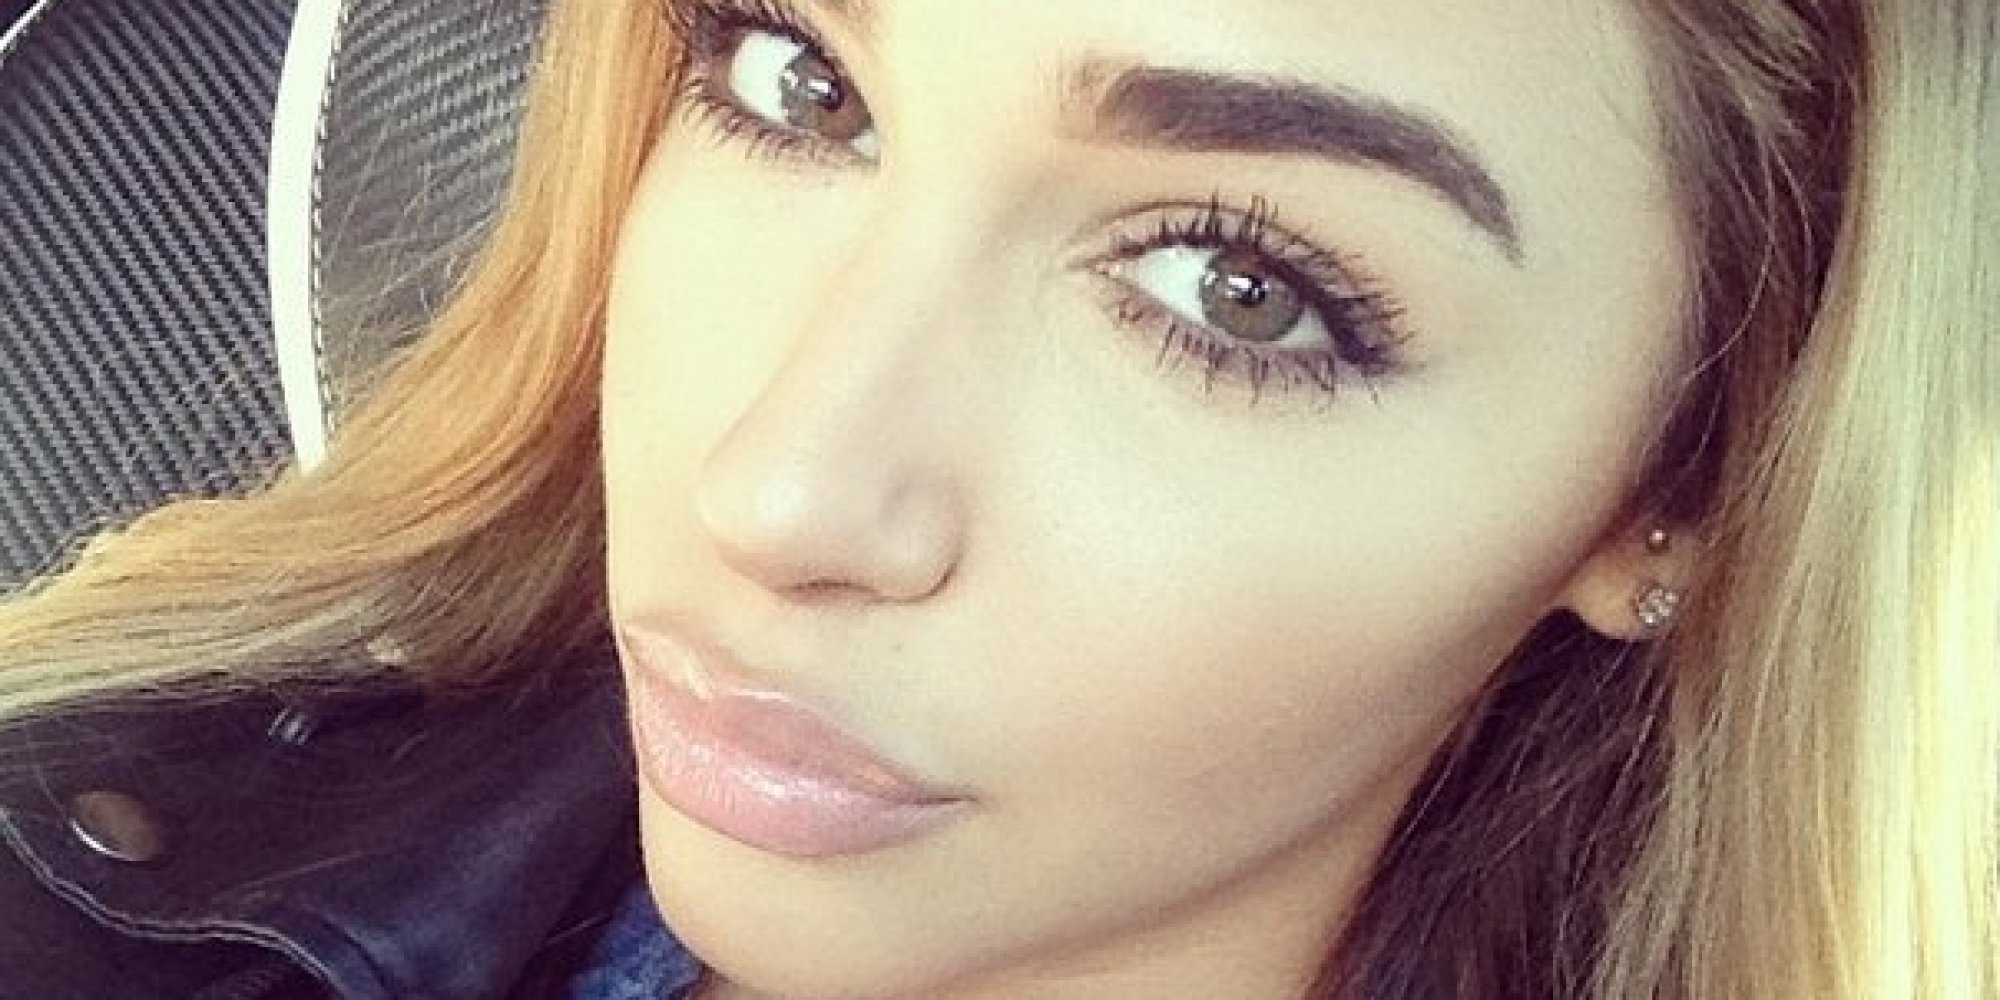 Model Chantel Jeffries Rides With Justin Bieber Before Arrest | HuffPost